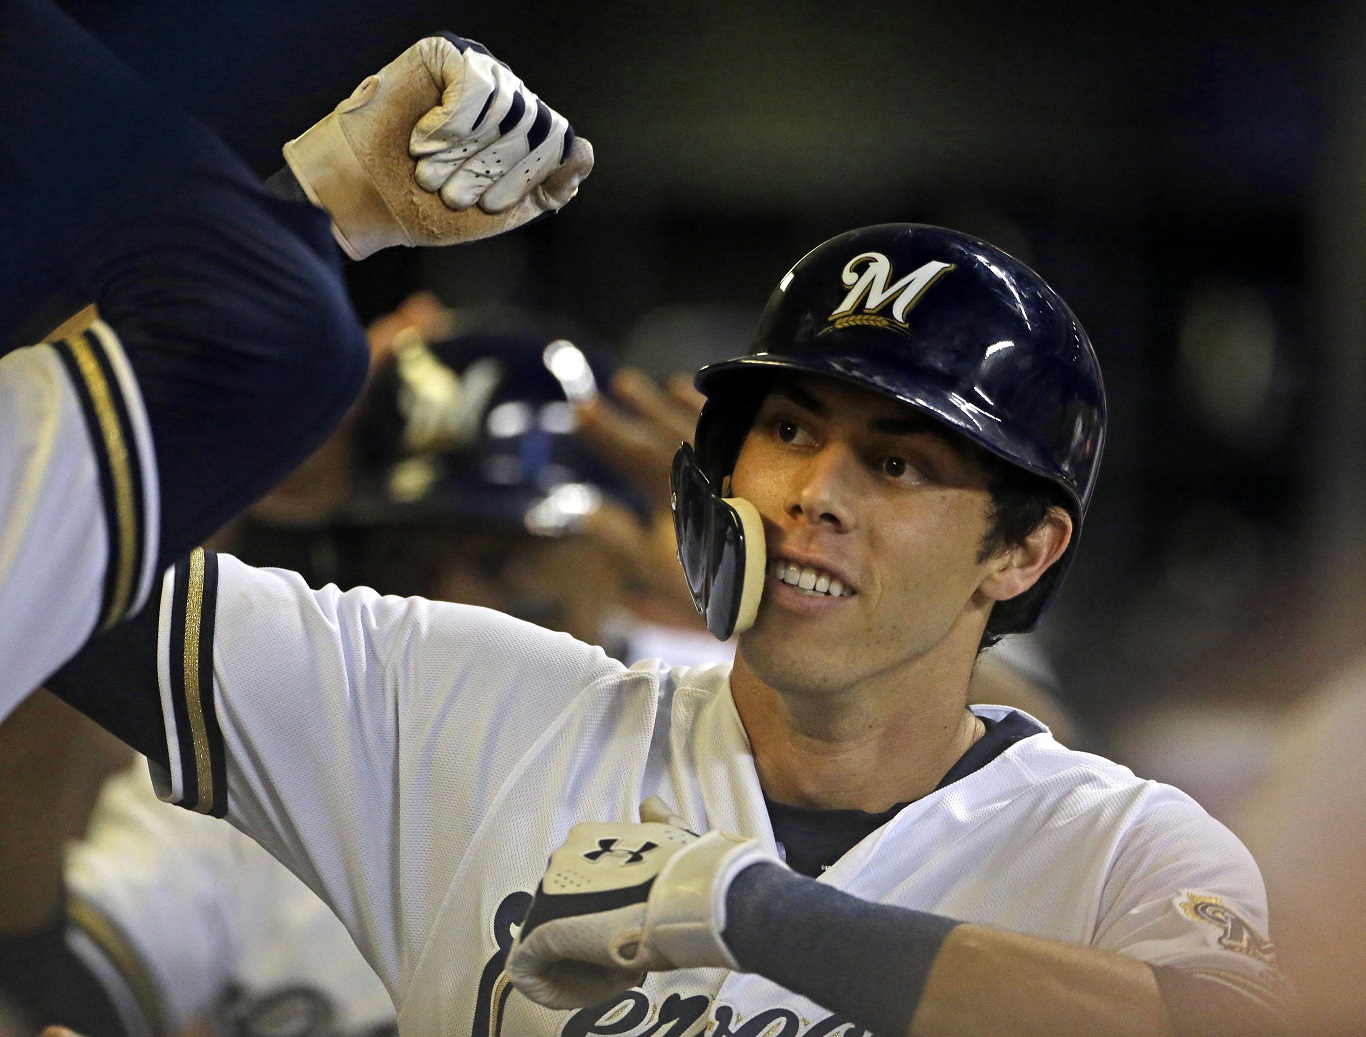 Yelich will be paid deferred money by Brewers until 2042